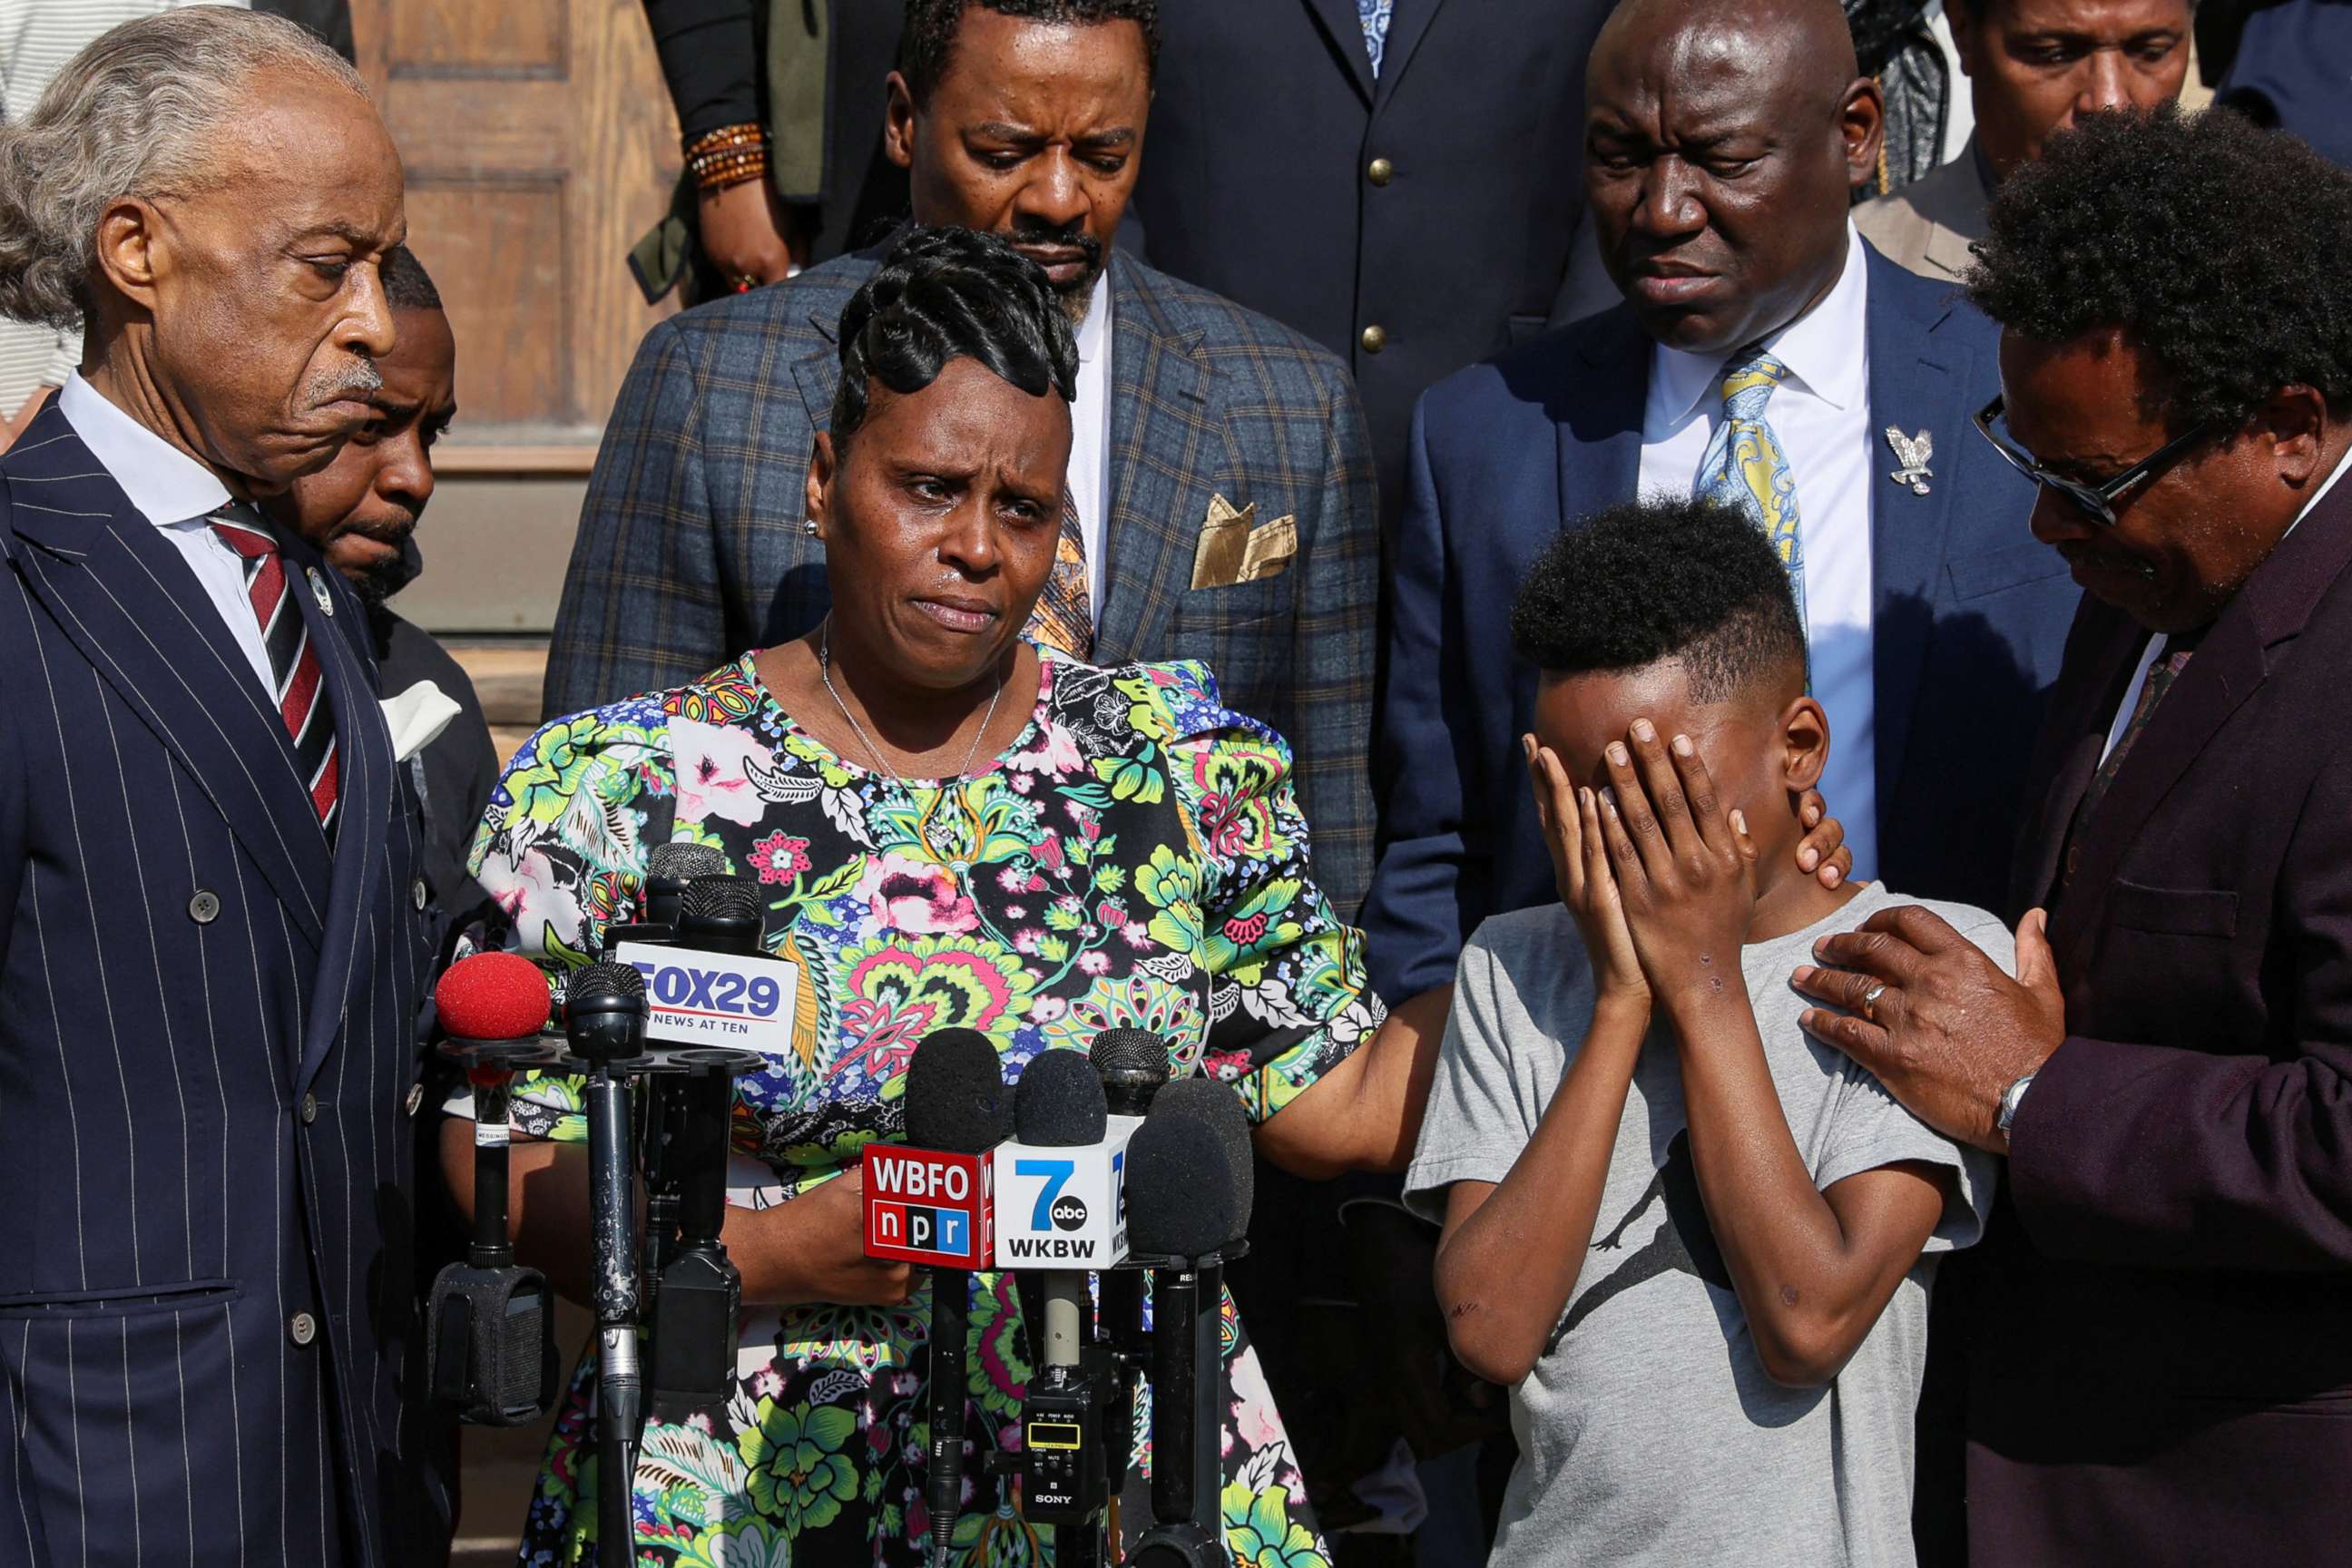 PHOTO: Jacob Patterson, son of shooting victim Heyward Patterson, is comforted by his mother Tirzah Patterson during a news conference with Reverend Al Sharpton, left, in the wake of a shooting at a supermarket in Buffalo, New York, May 19, 2022.